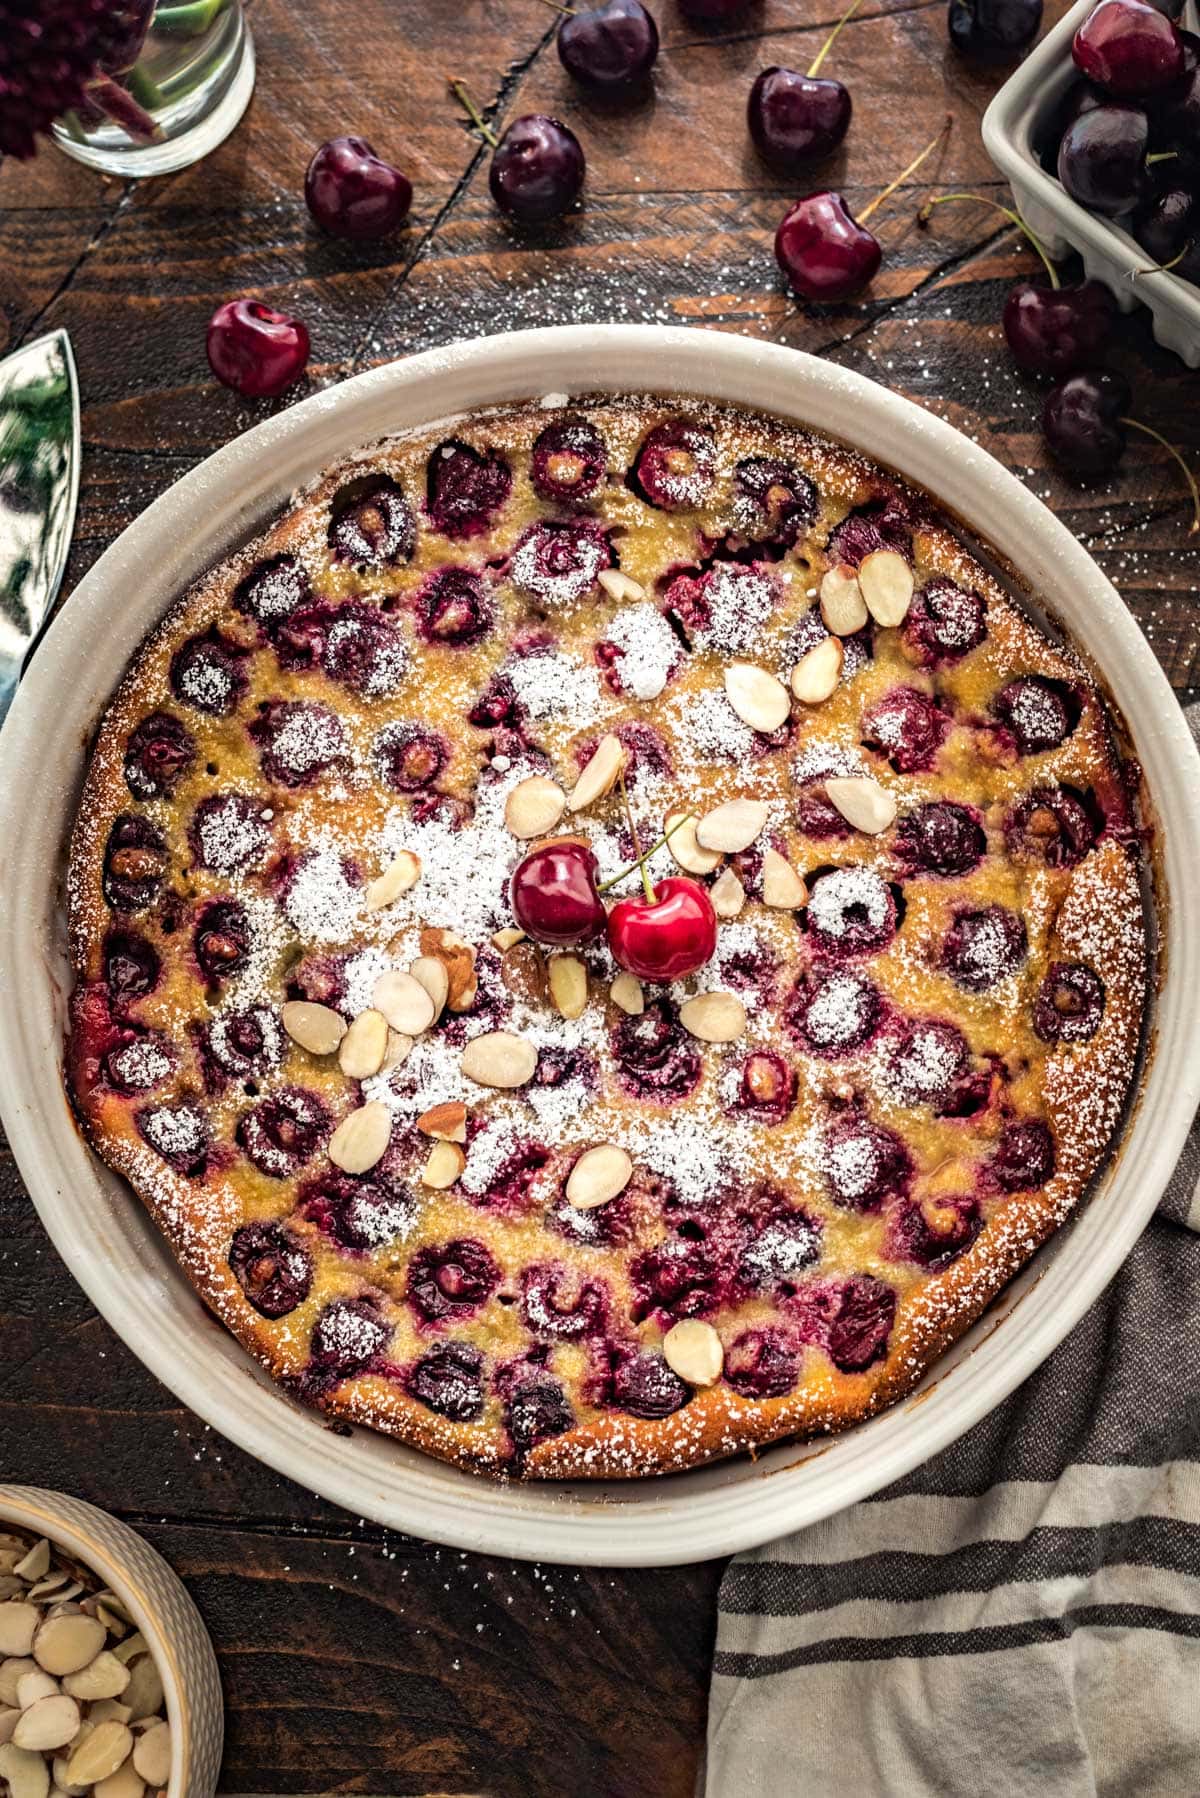 A cherry clafoutis baked in a large white dish.